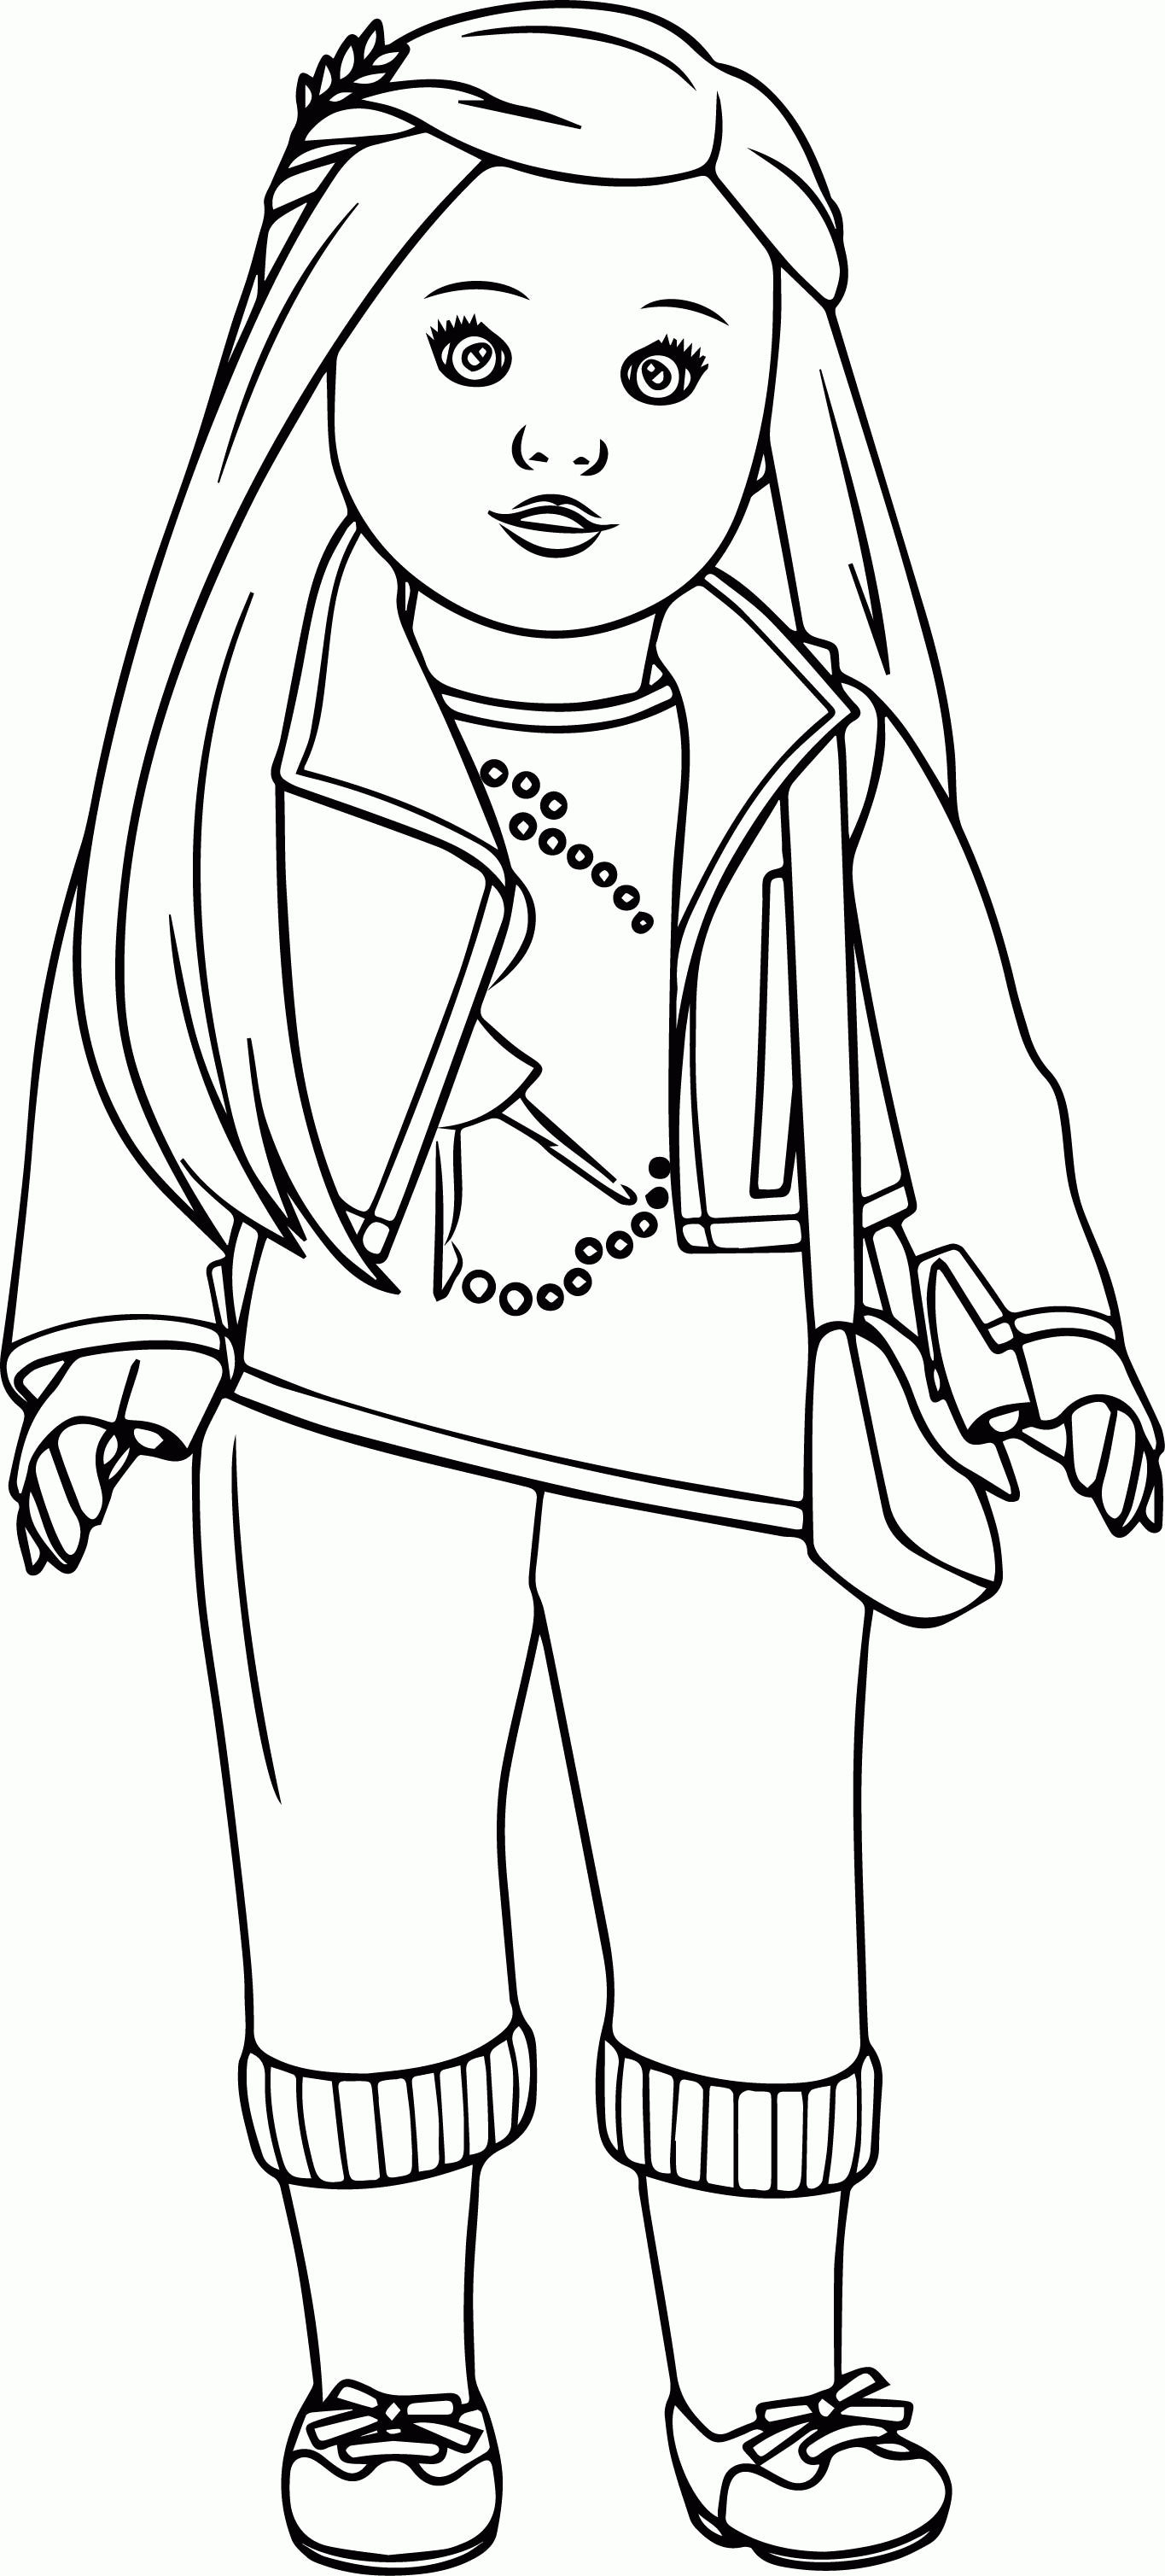 American Girl Isabelle Doll Coloring Page 15382, - Bestofcoloring.com